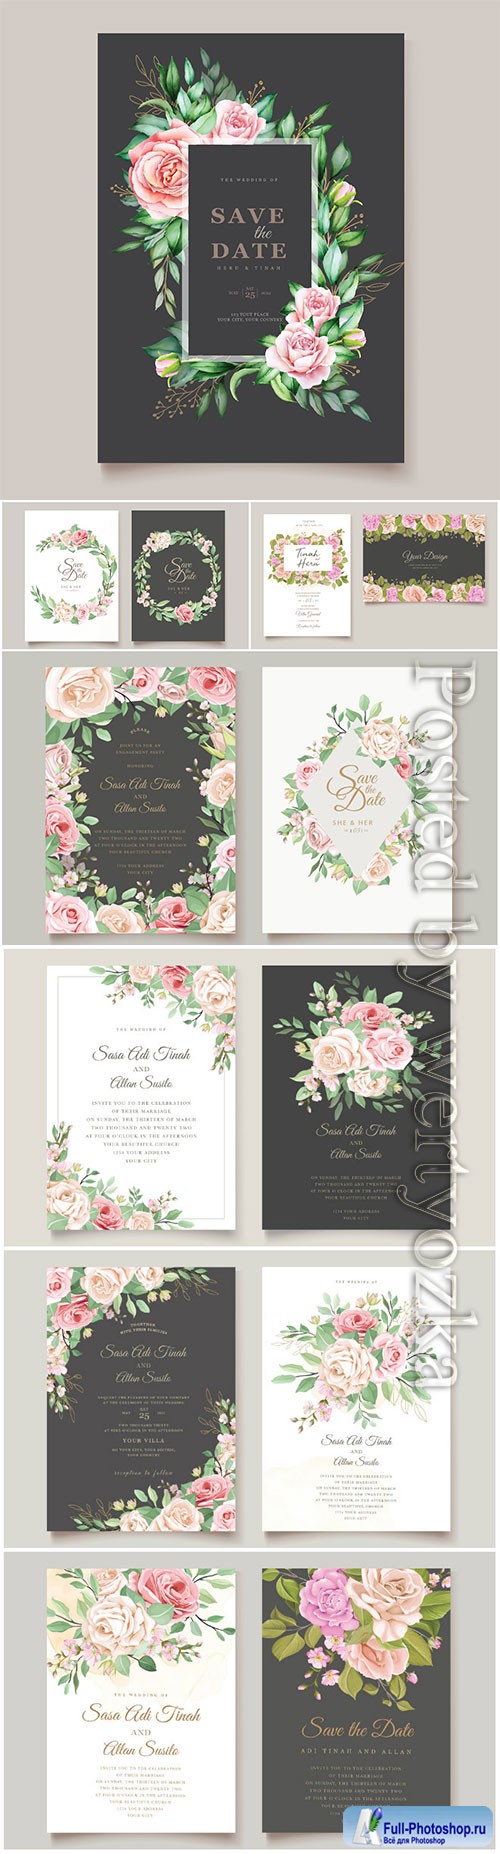 Wedding invitation vector card with floral and leaves